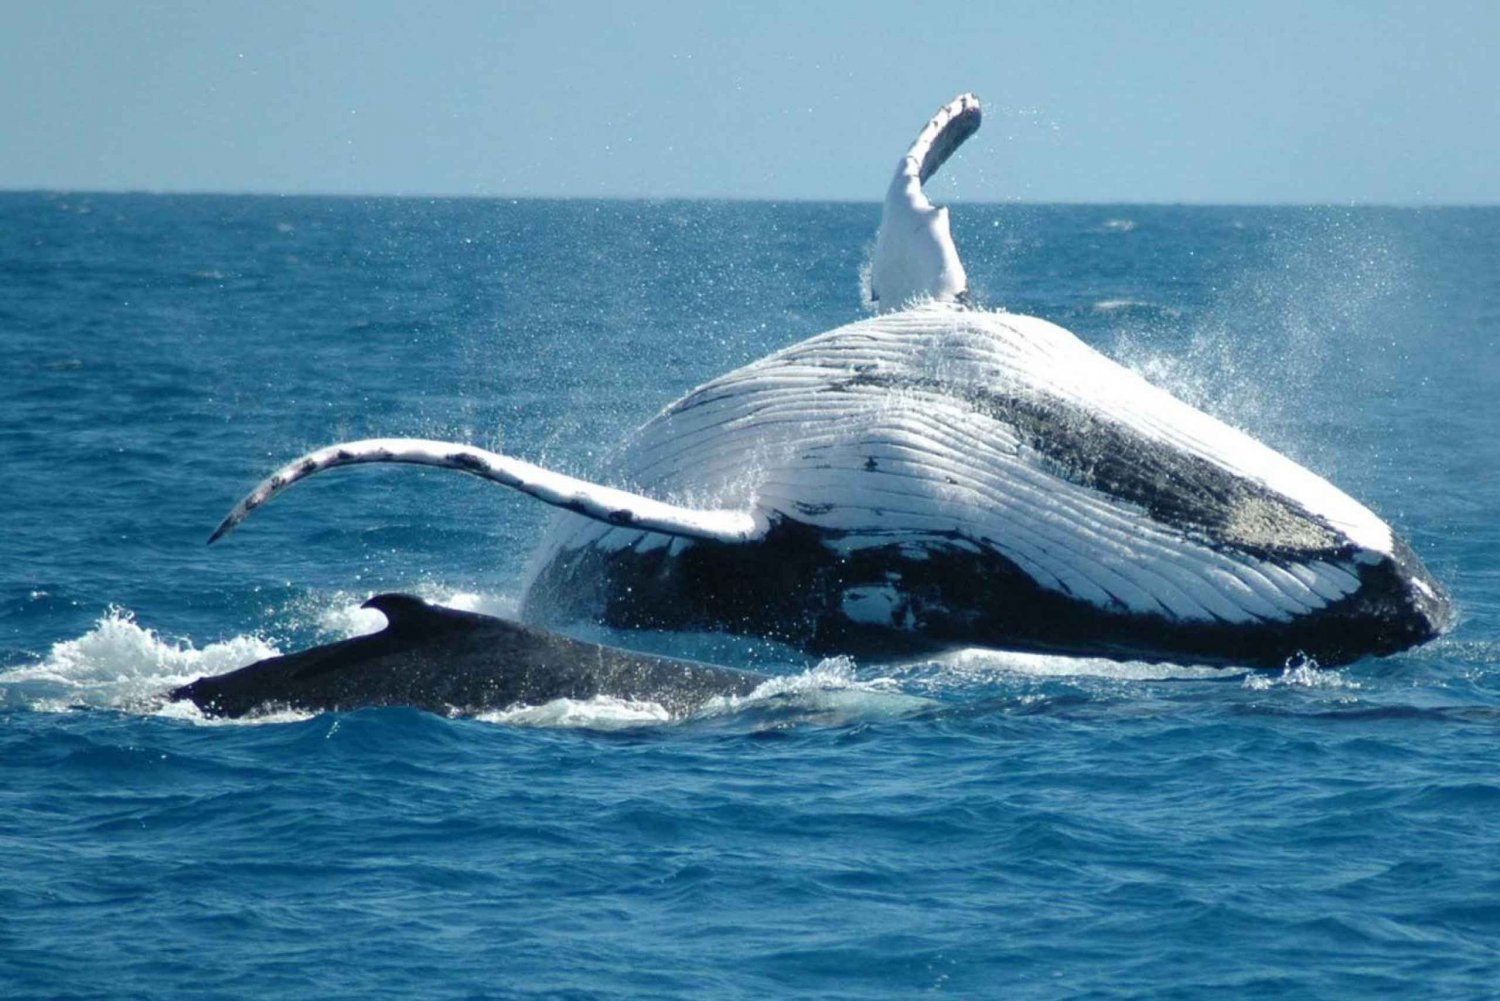 From Punta Cana: Sanctuary Whale Watching Day Trip